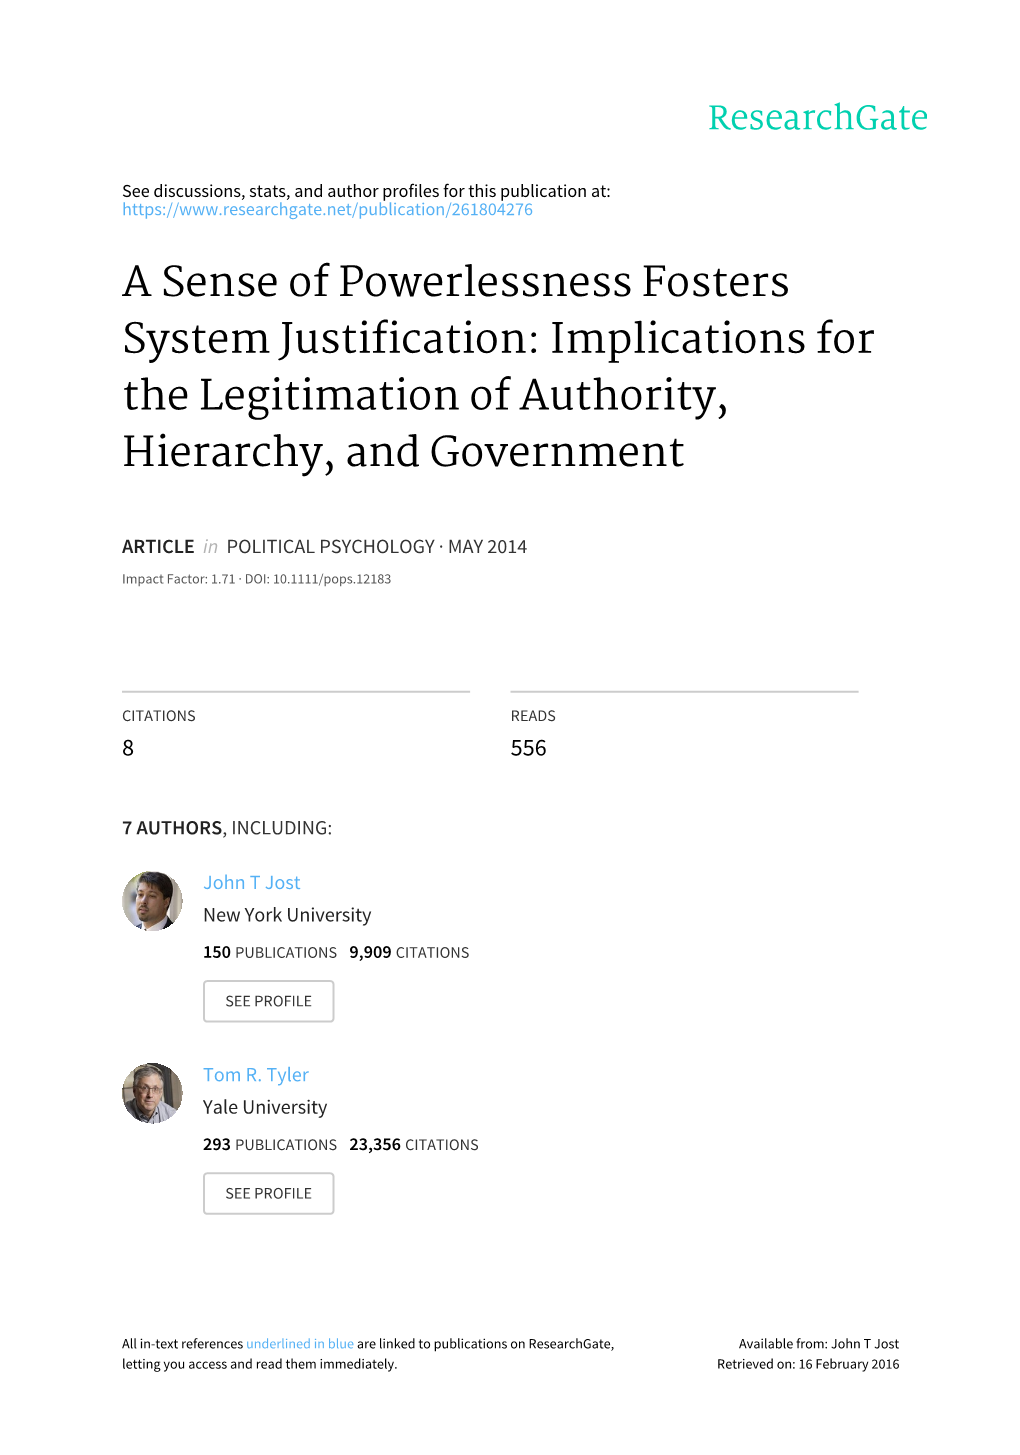 A Sense of Powerlessness Fosters System Justification: Implications for the Legitimation of Authority, Hierarchy, and Government